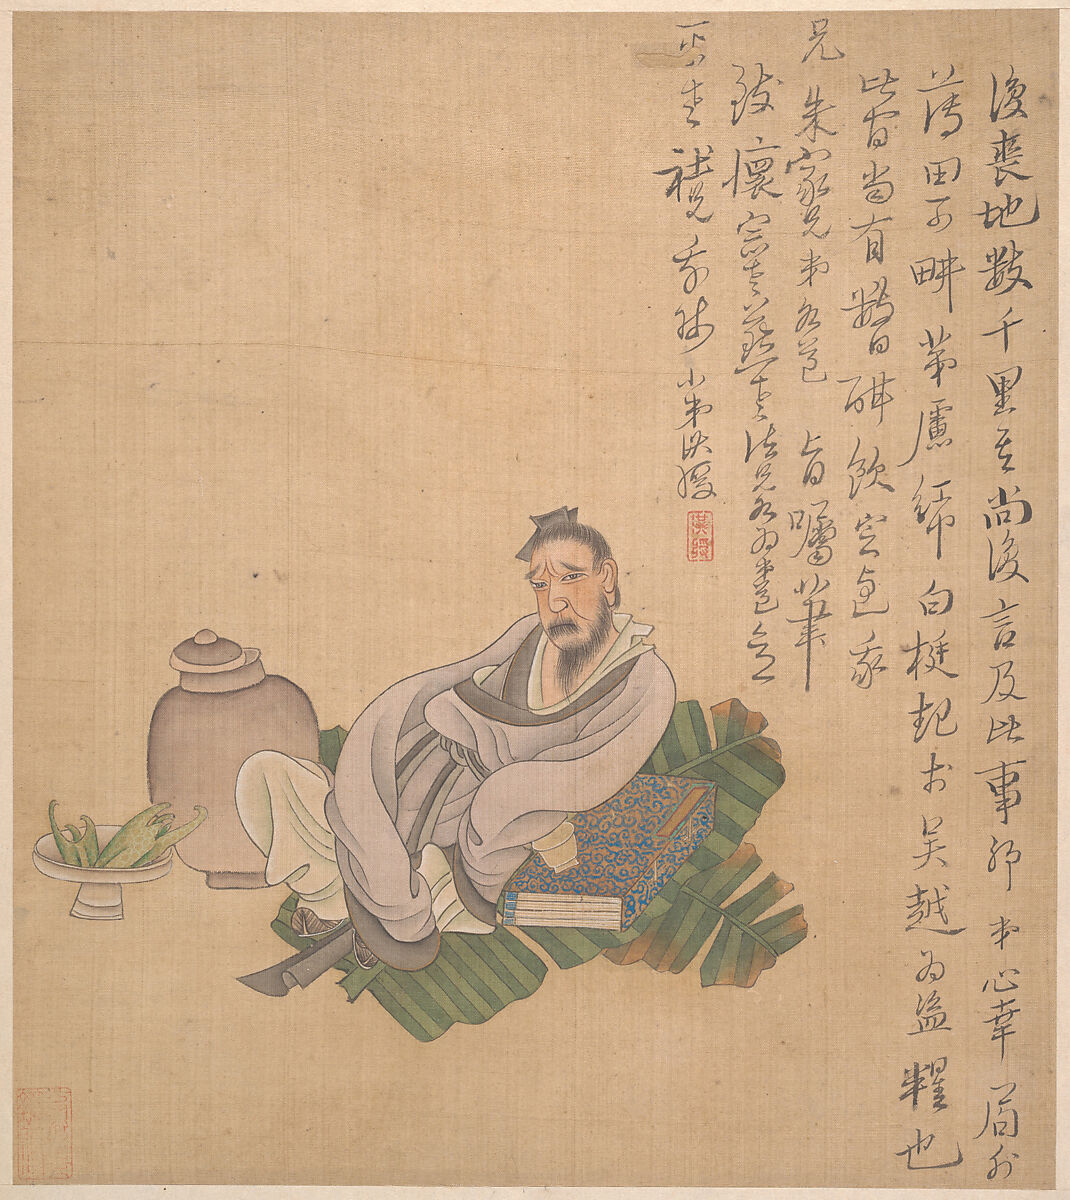 Figures, flowers, and landscapes, Chen Hongshou, Album of eleven leaves; ink and color on silk, China